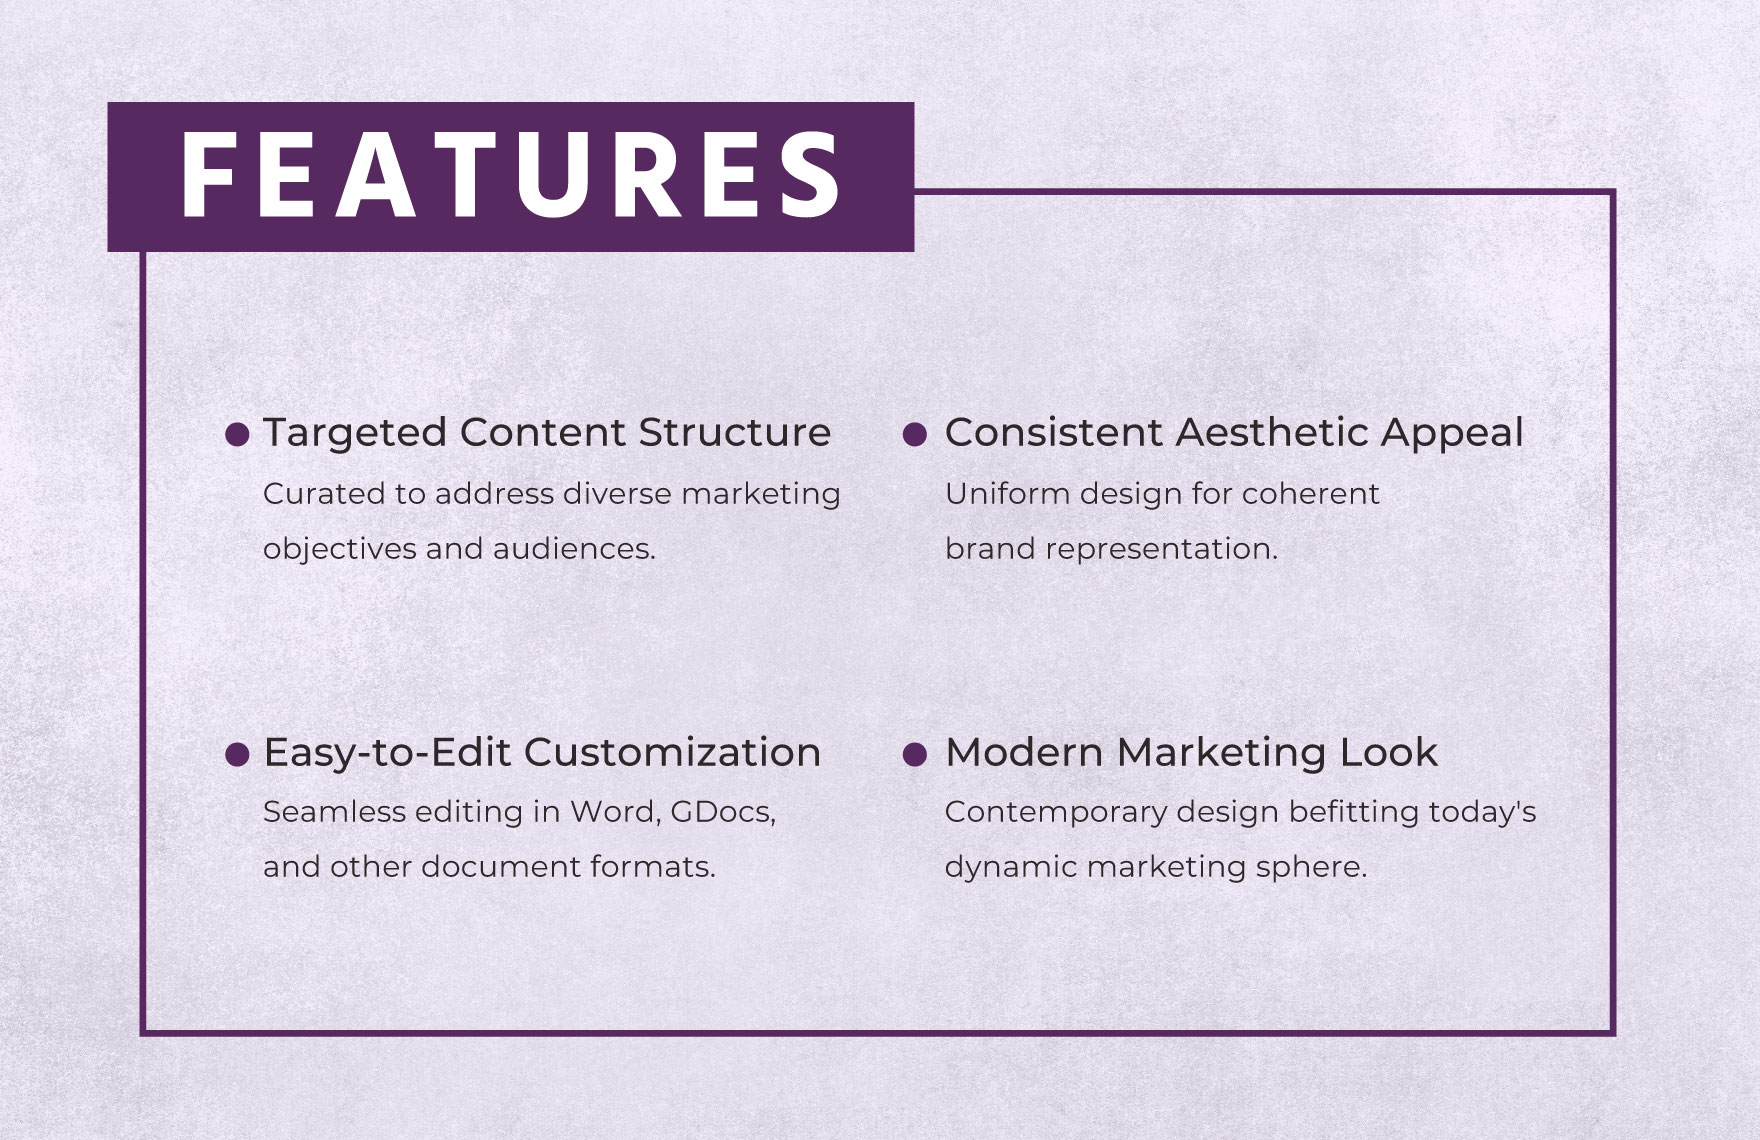 Marketing Content Archiving Resolution Template